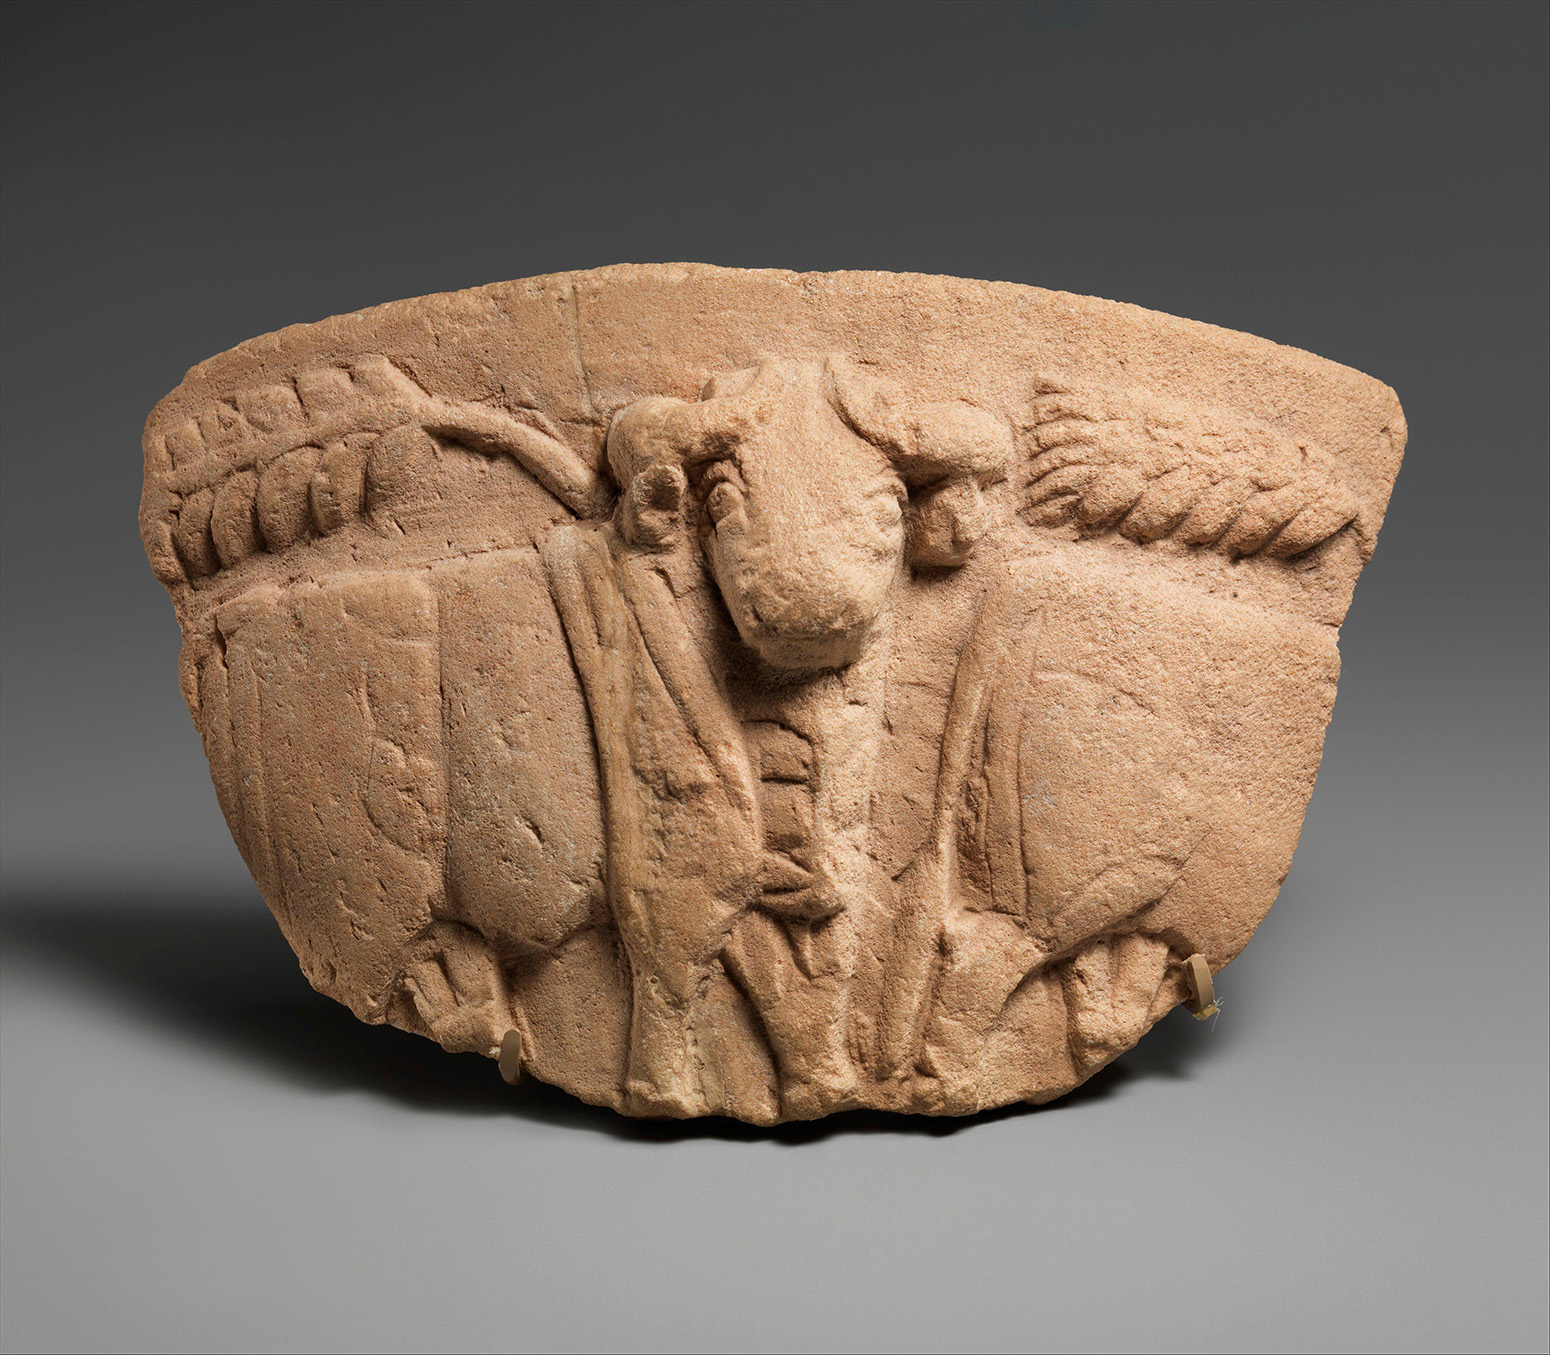 The fragment of a limestone vessel with wheat stalks and a procession of bulls in relief,  Southern Mesopotamia (ca. 3300–2900 B.C). Credit: Met Museum - Bequest of W. Gedney Beatty, 1941.